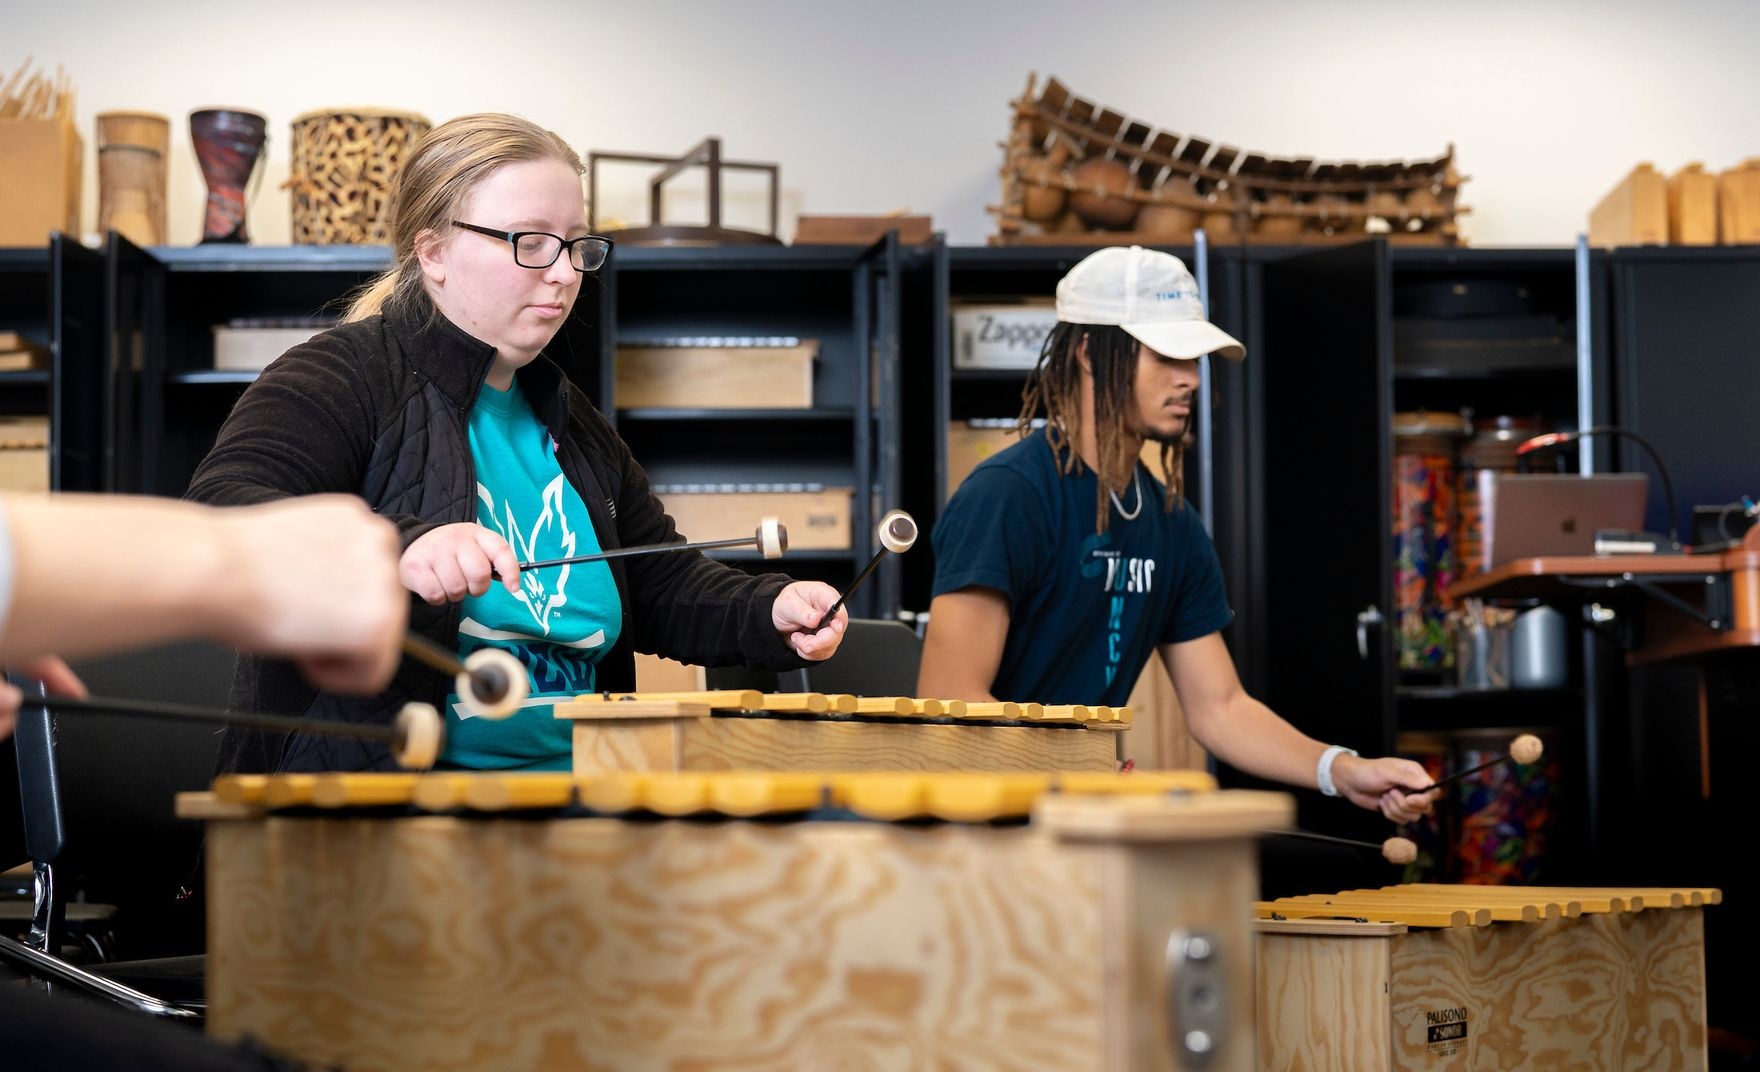 Students hammering on wooden xylophone-like instruments